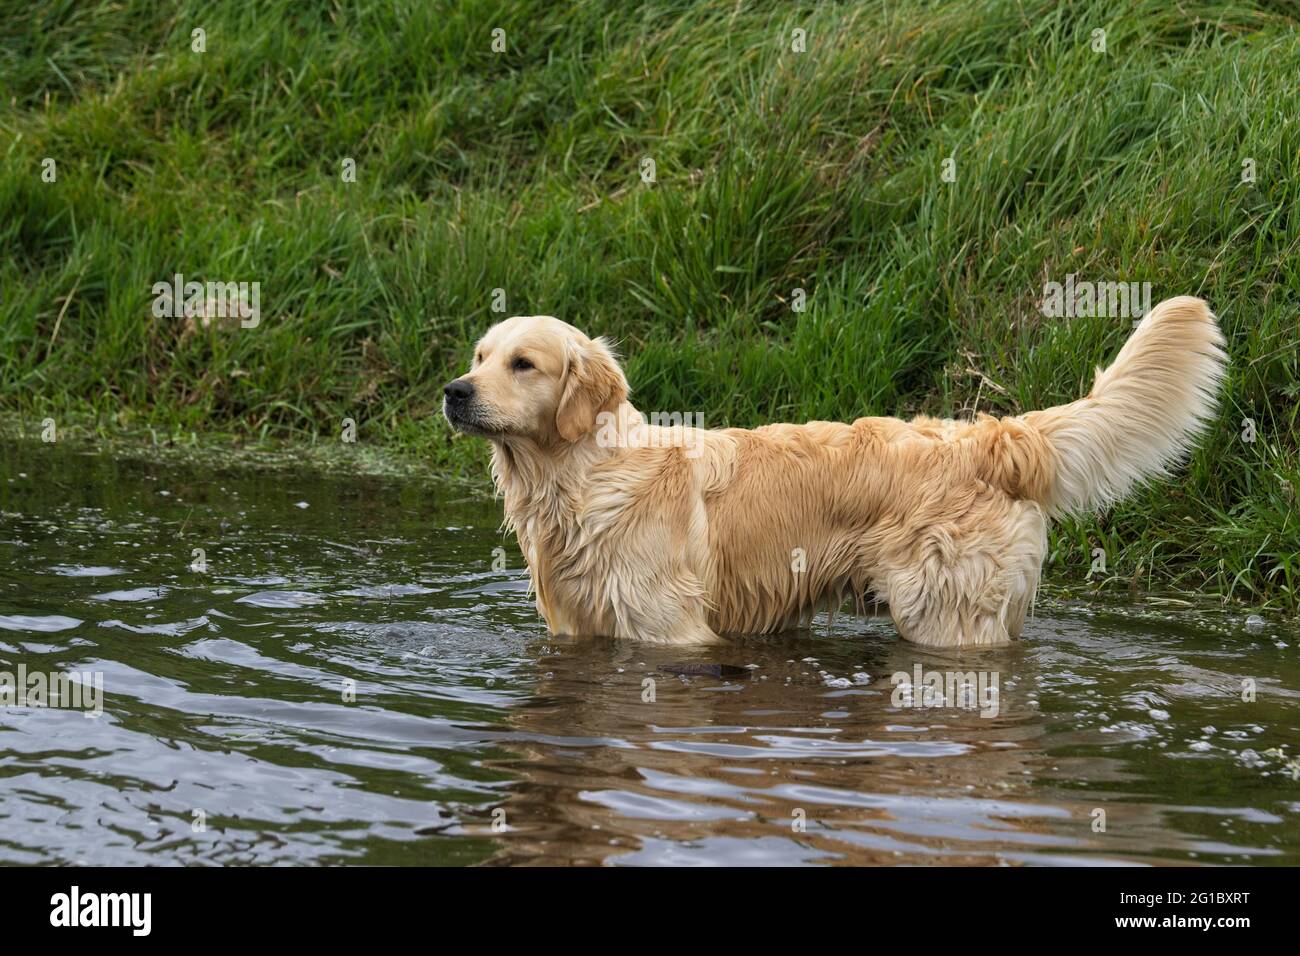 Golden retrievers in a country setting. Stock Photo